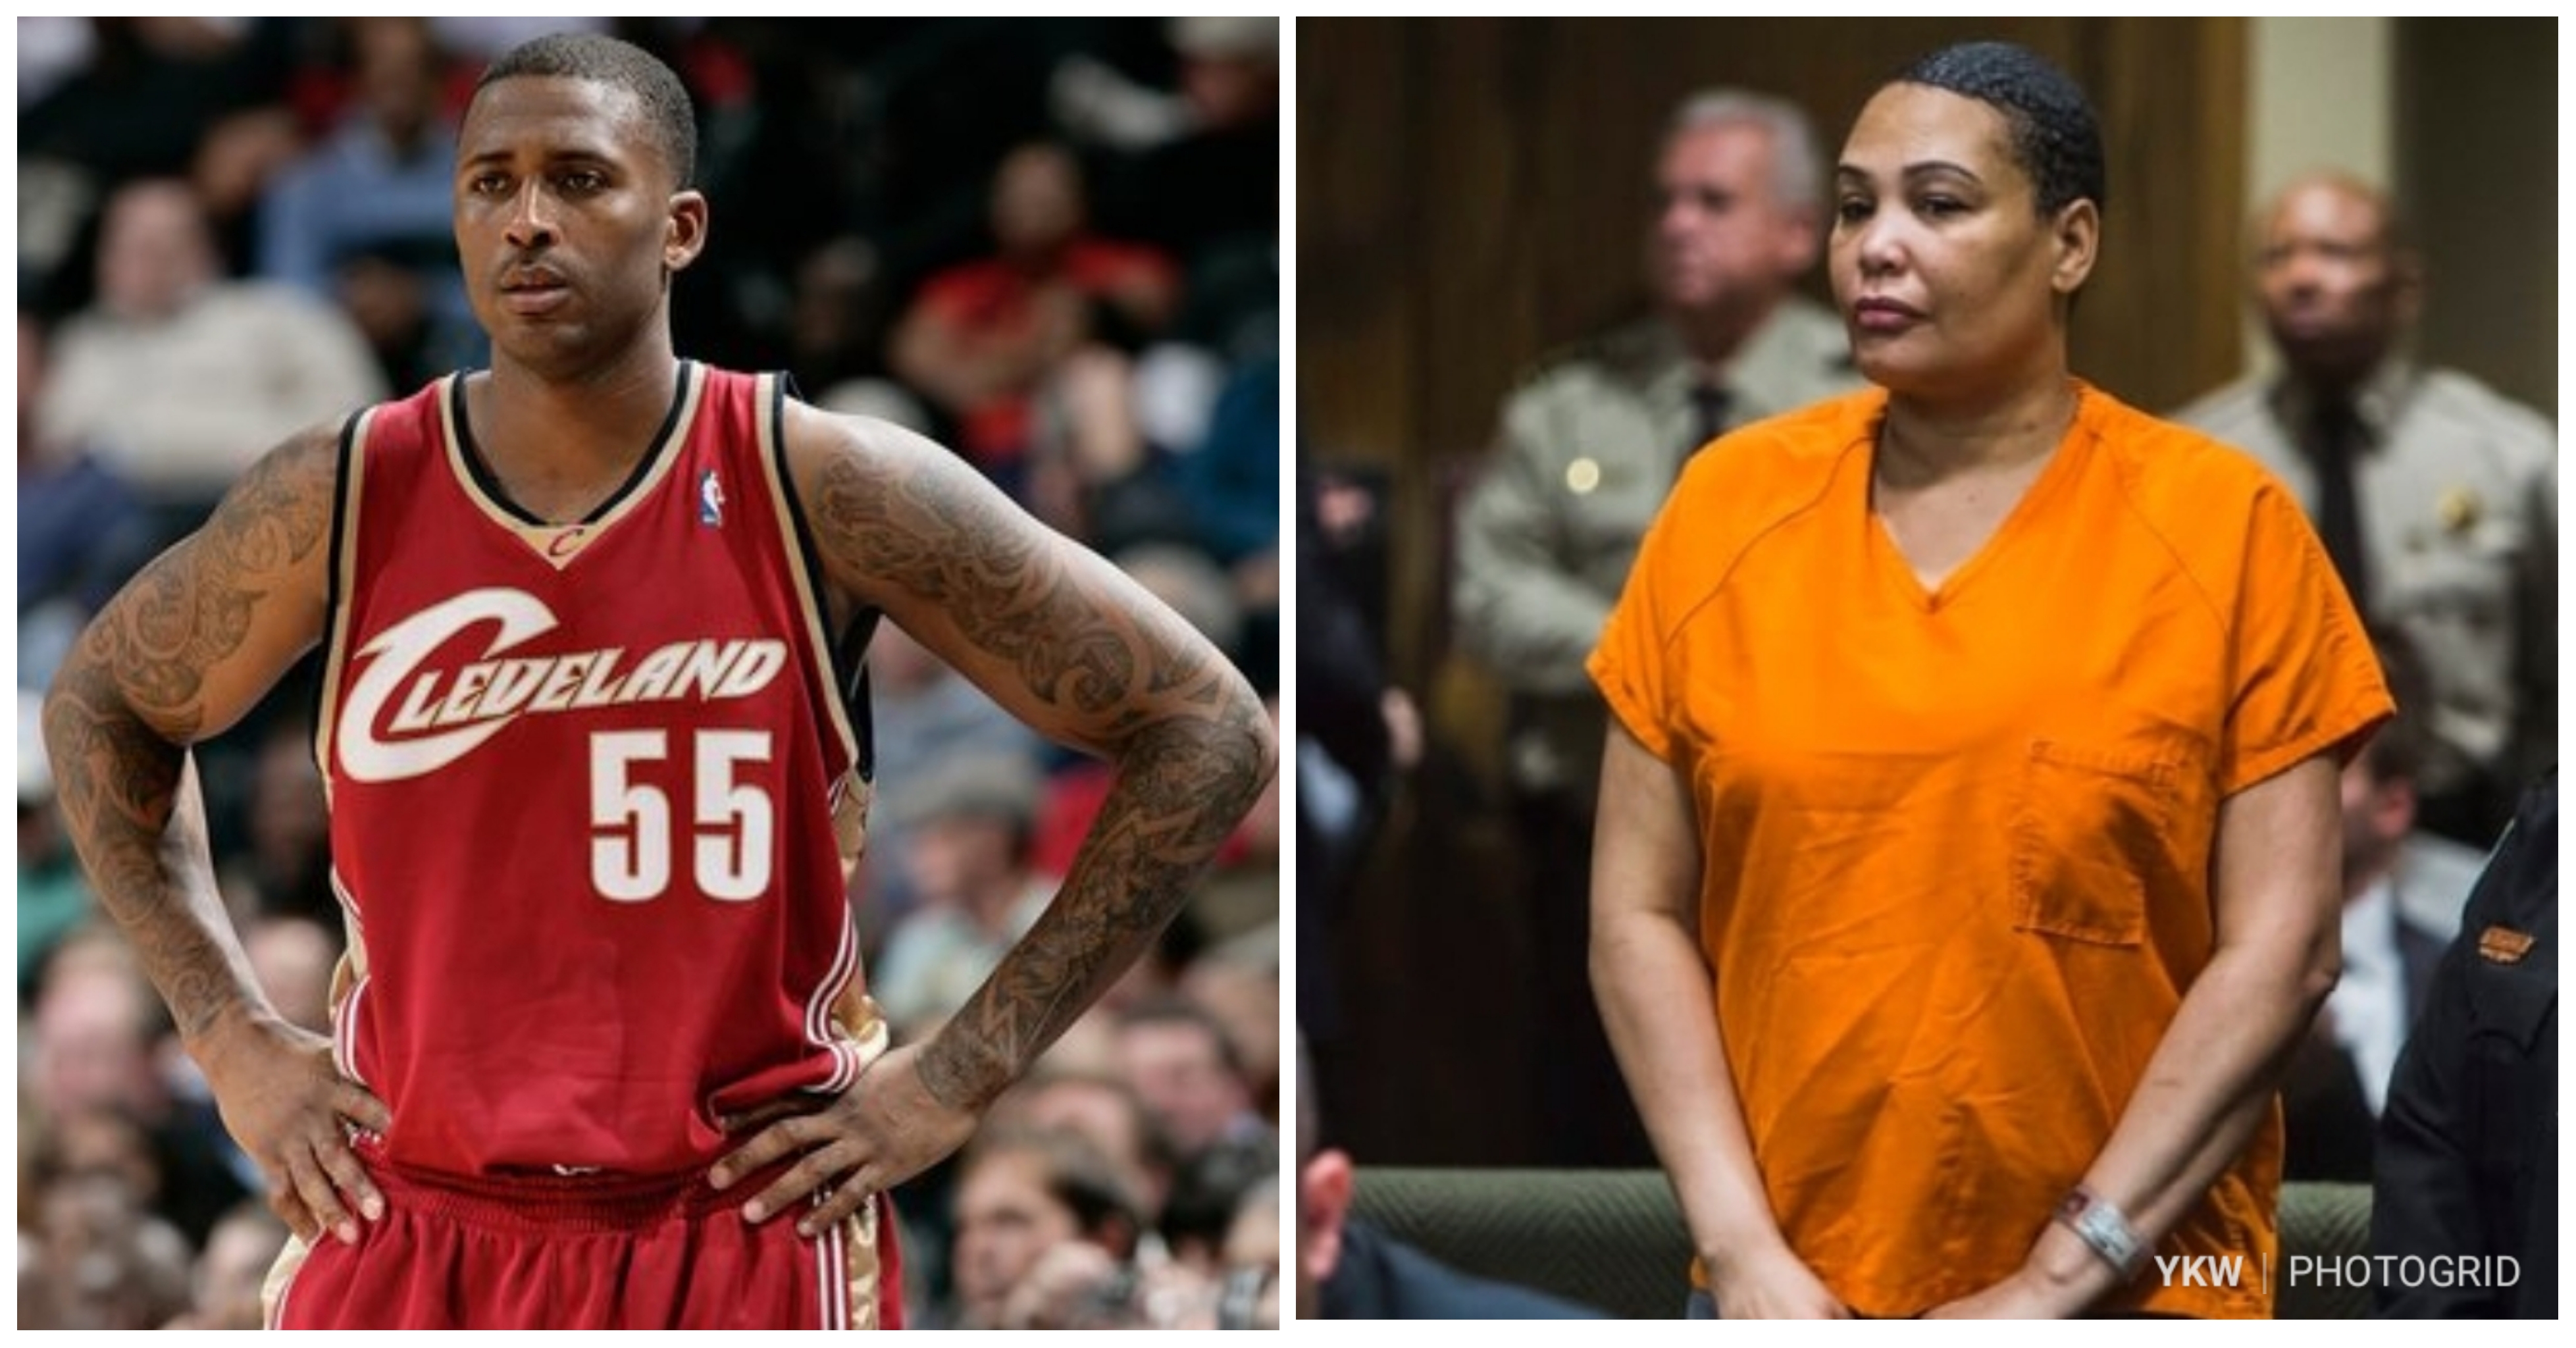 Ex-Wife Pleads Guilty To The Killing of NBA Player Lorenzen Wright